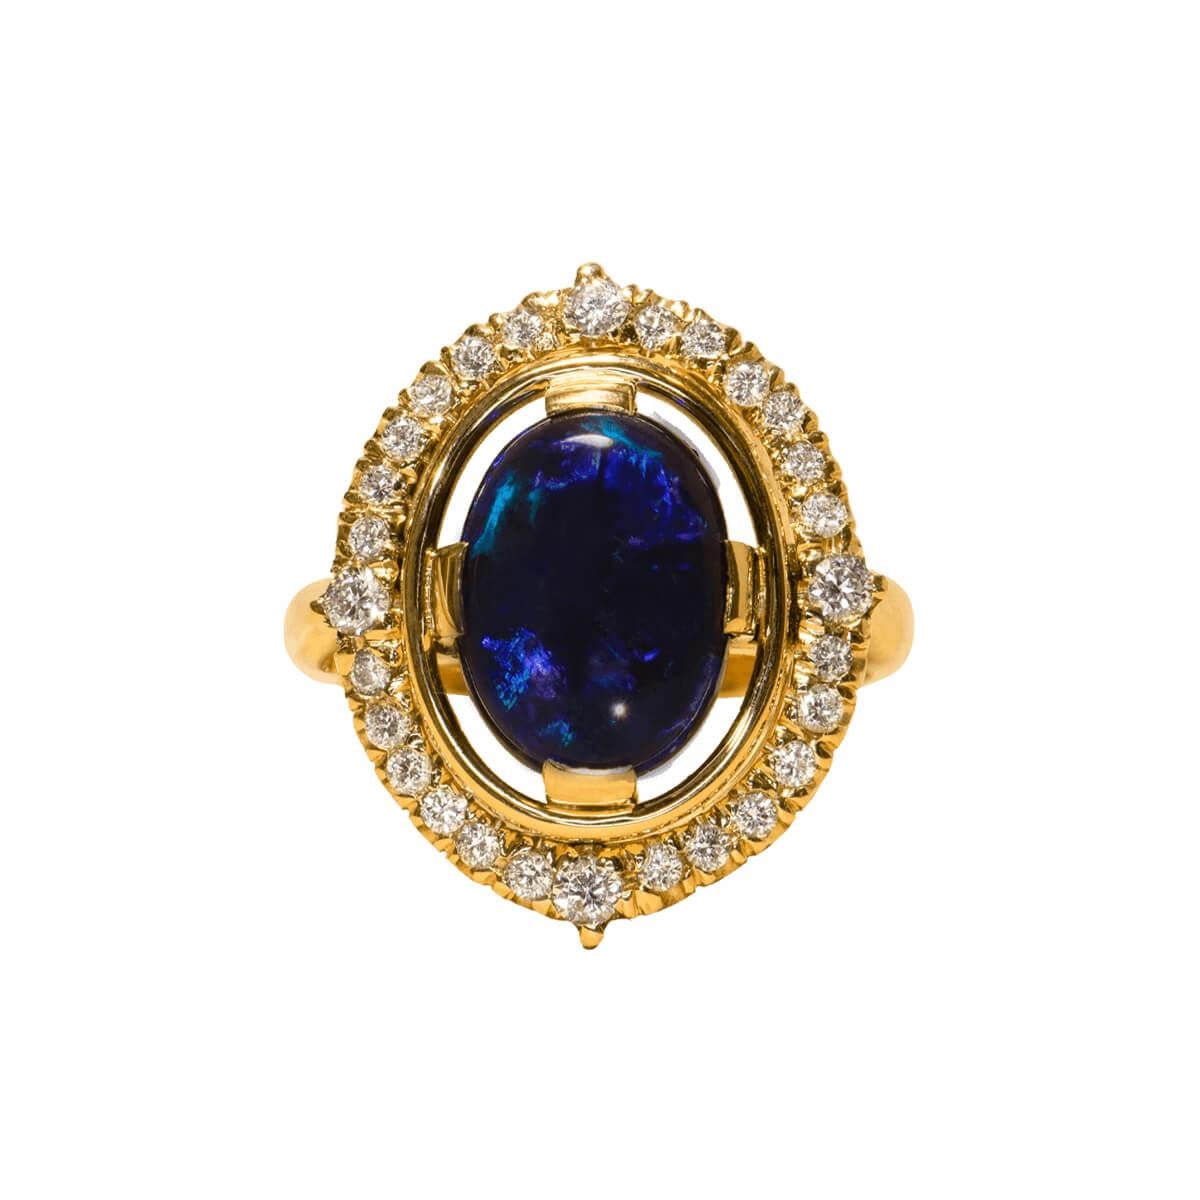 The deep blues shimmer in this Australian Black Opal like glowing flashes of an evening ocean. The brilliant white diamonds sparkle in the light, reflecting in the high polish of the opal like stars meeting the ocean's horizon on a clear romantic